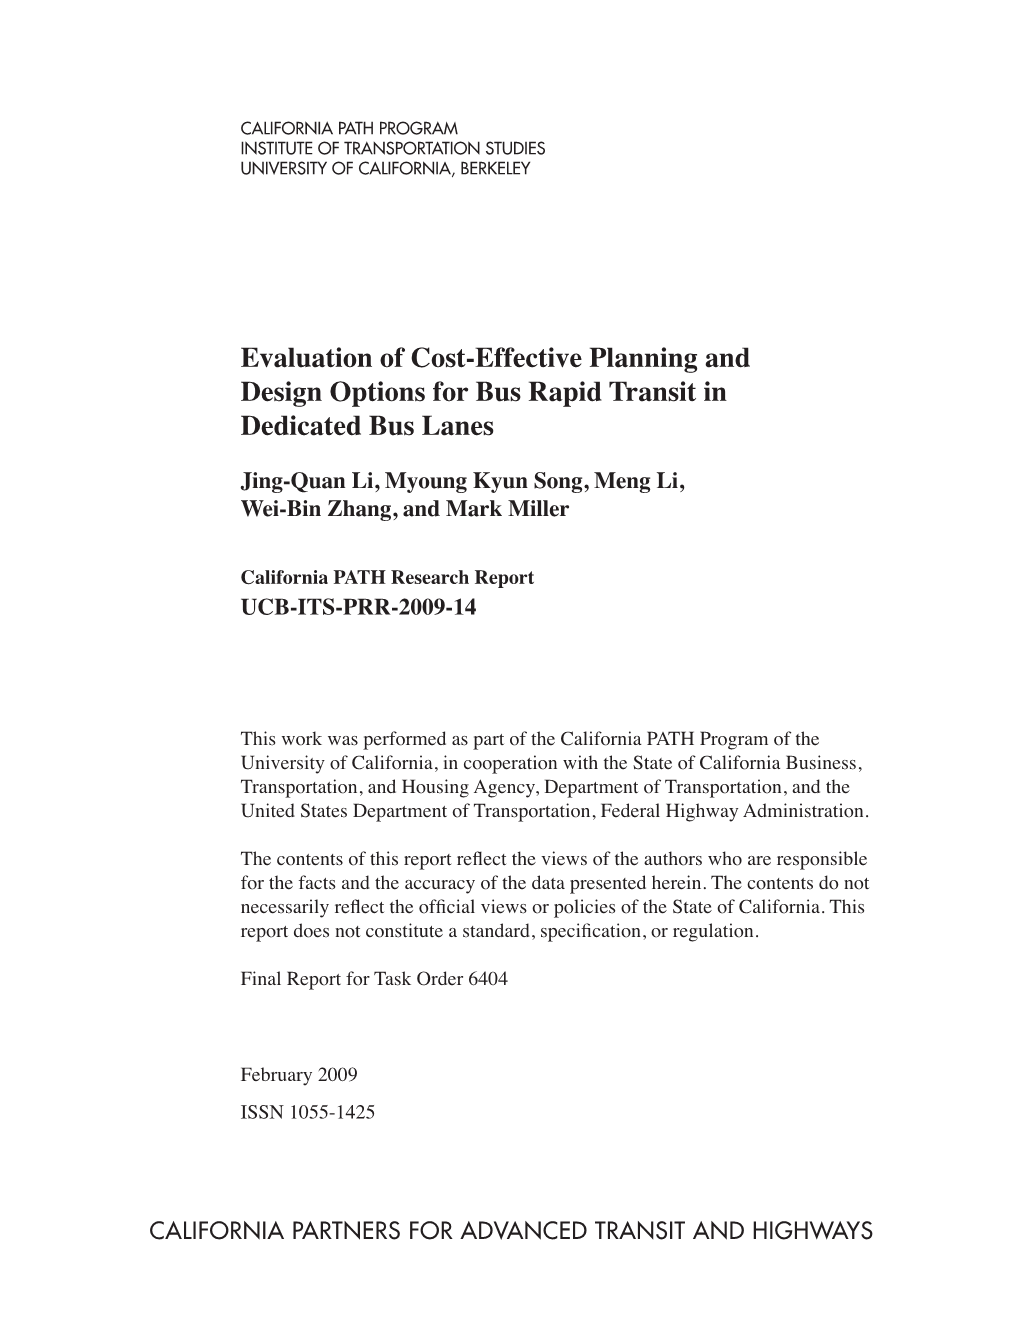 Evaluation of Cost-Effective Planning and Design Options for Bus Rapid Transit in Dedicated Bus Lanes